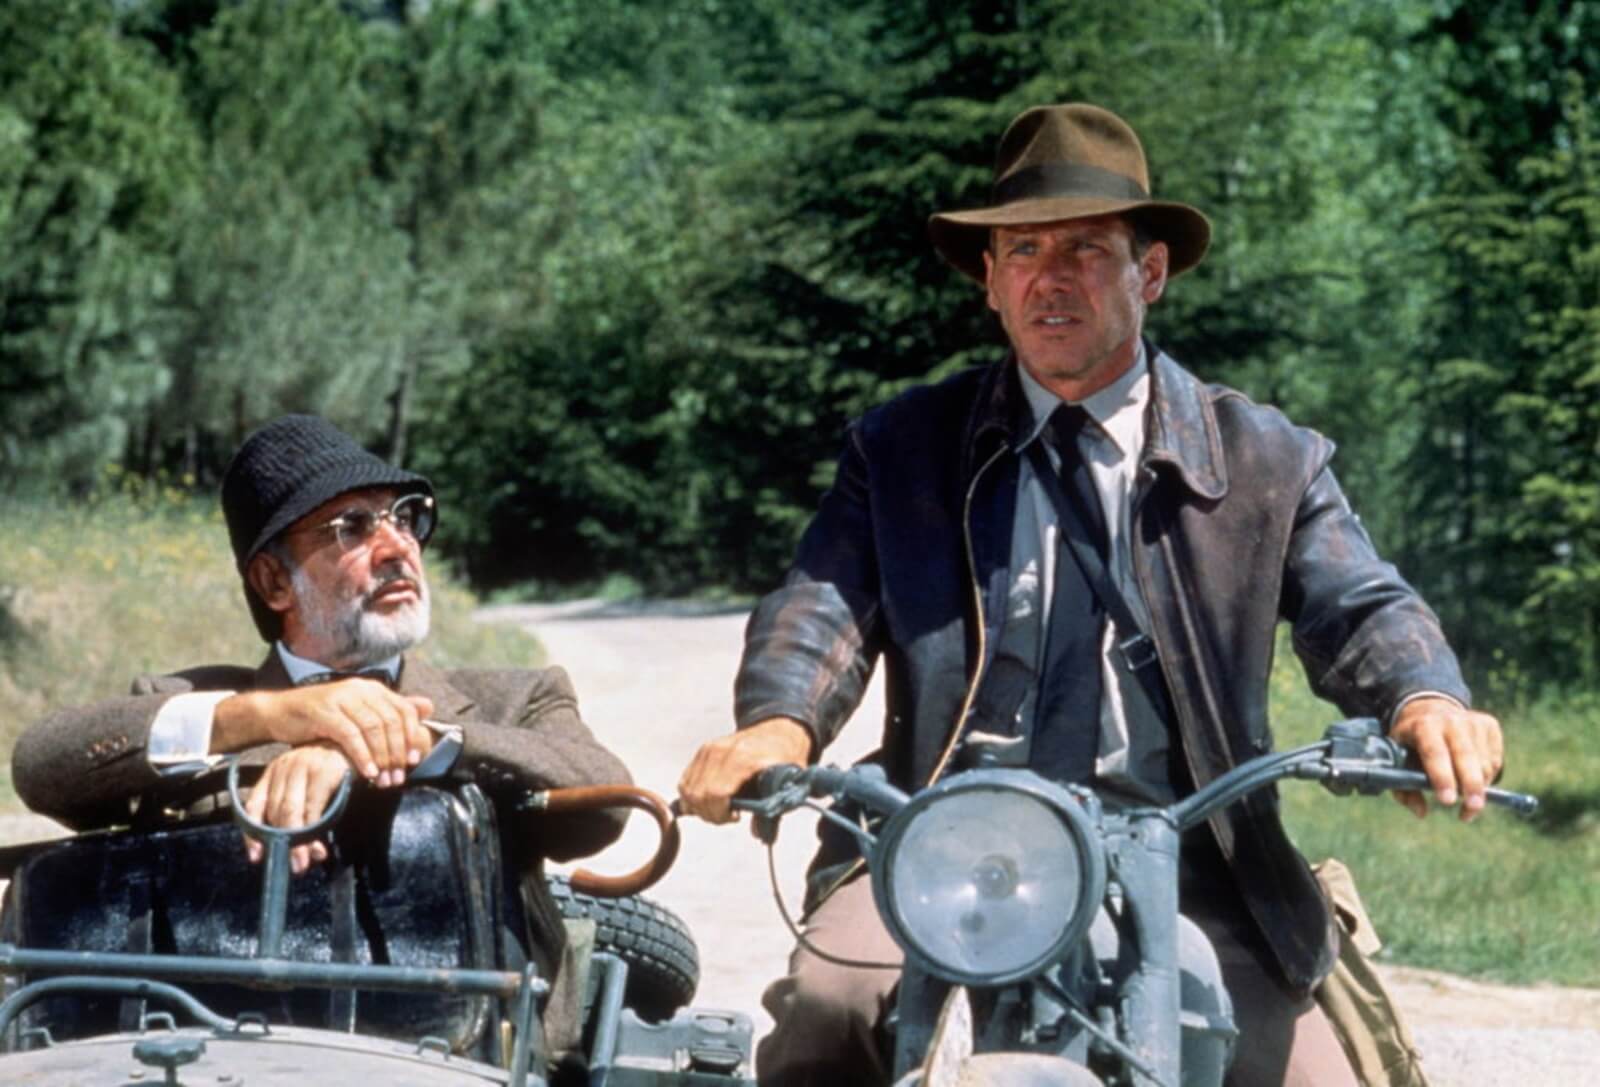 Harrison Ford and Sean Connery on a motorcycle for an Indiana Jones movie.